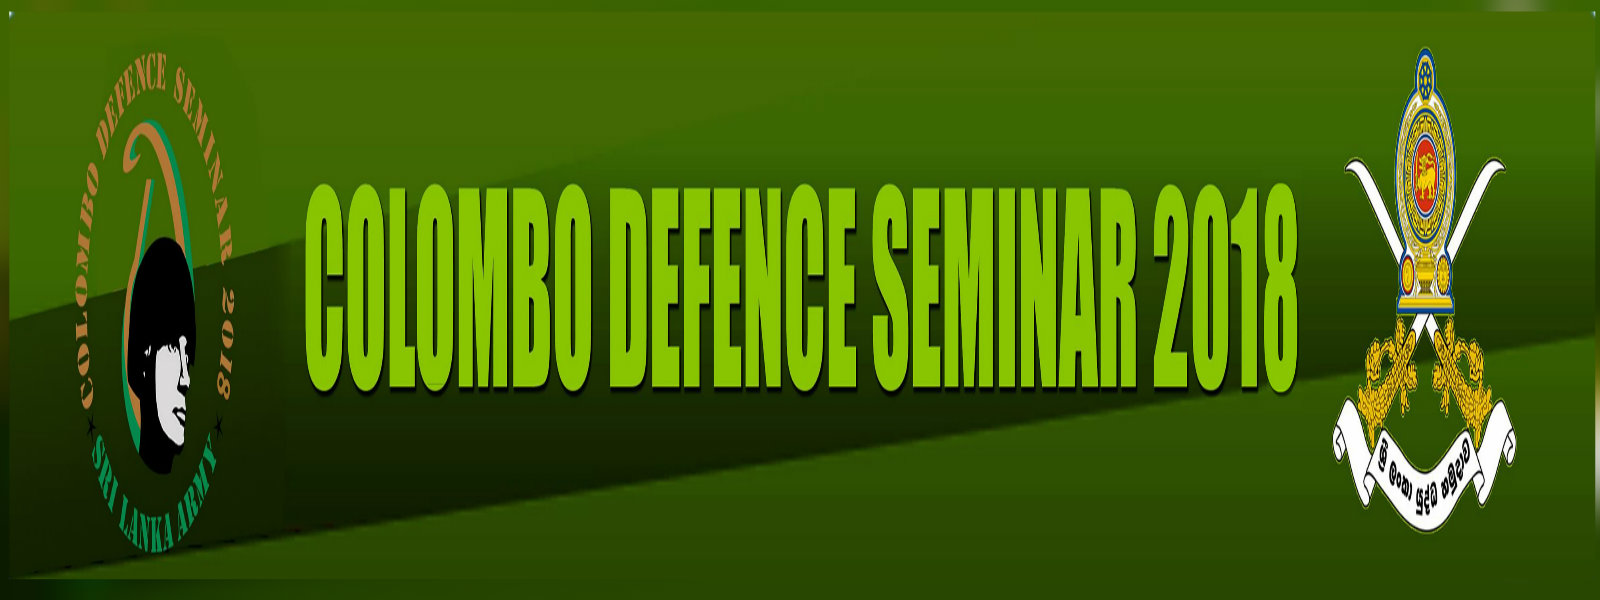 Defence seminar sponsored by global arms suppliers